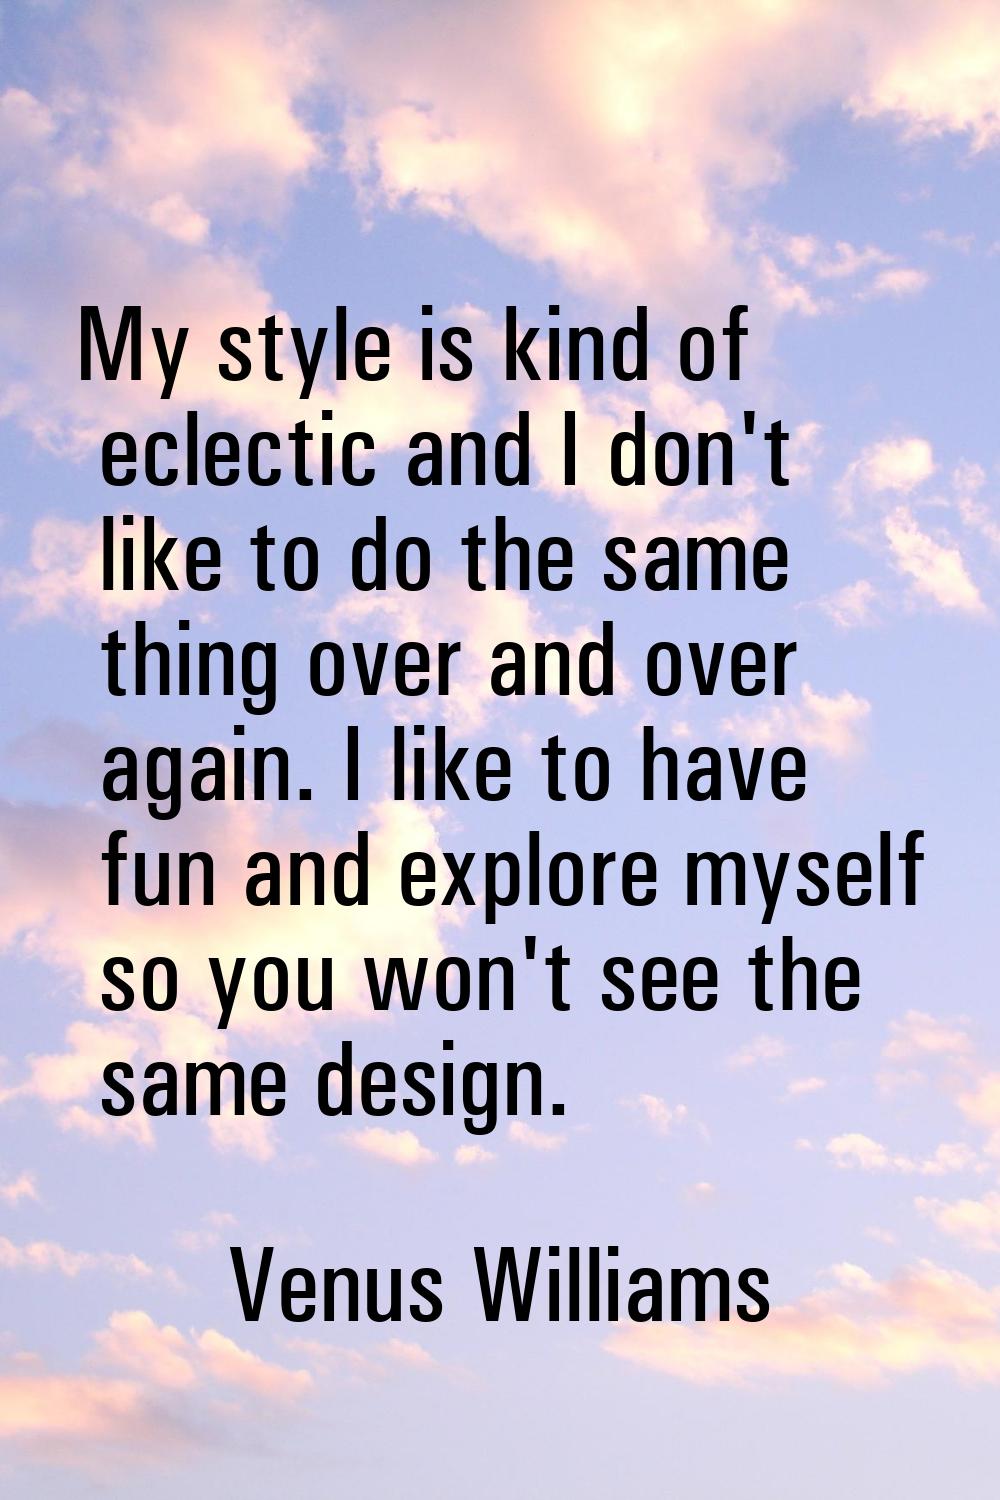 My style is kind of eclectic and I don't like to do the same thing over and over again. I like to h